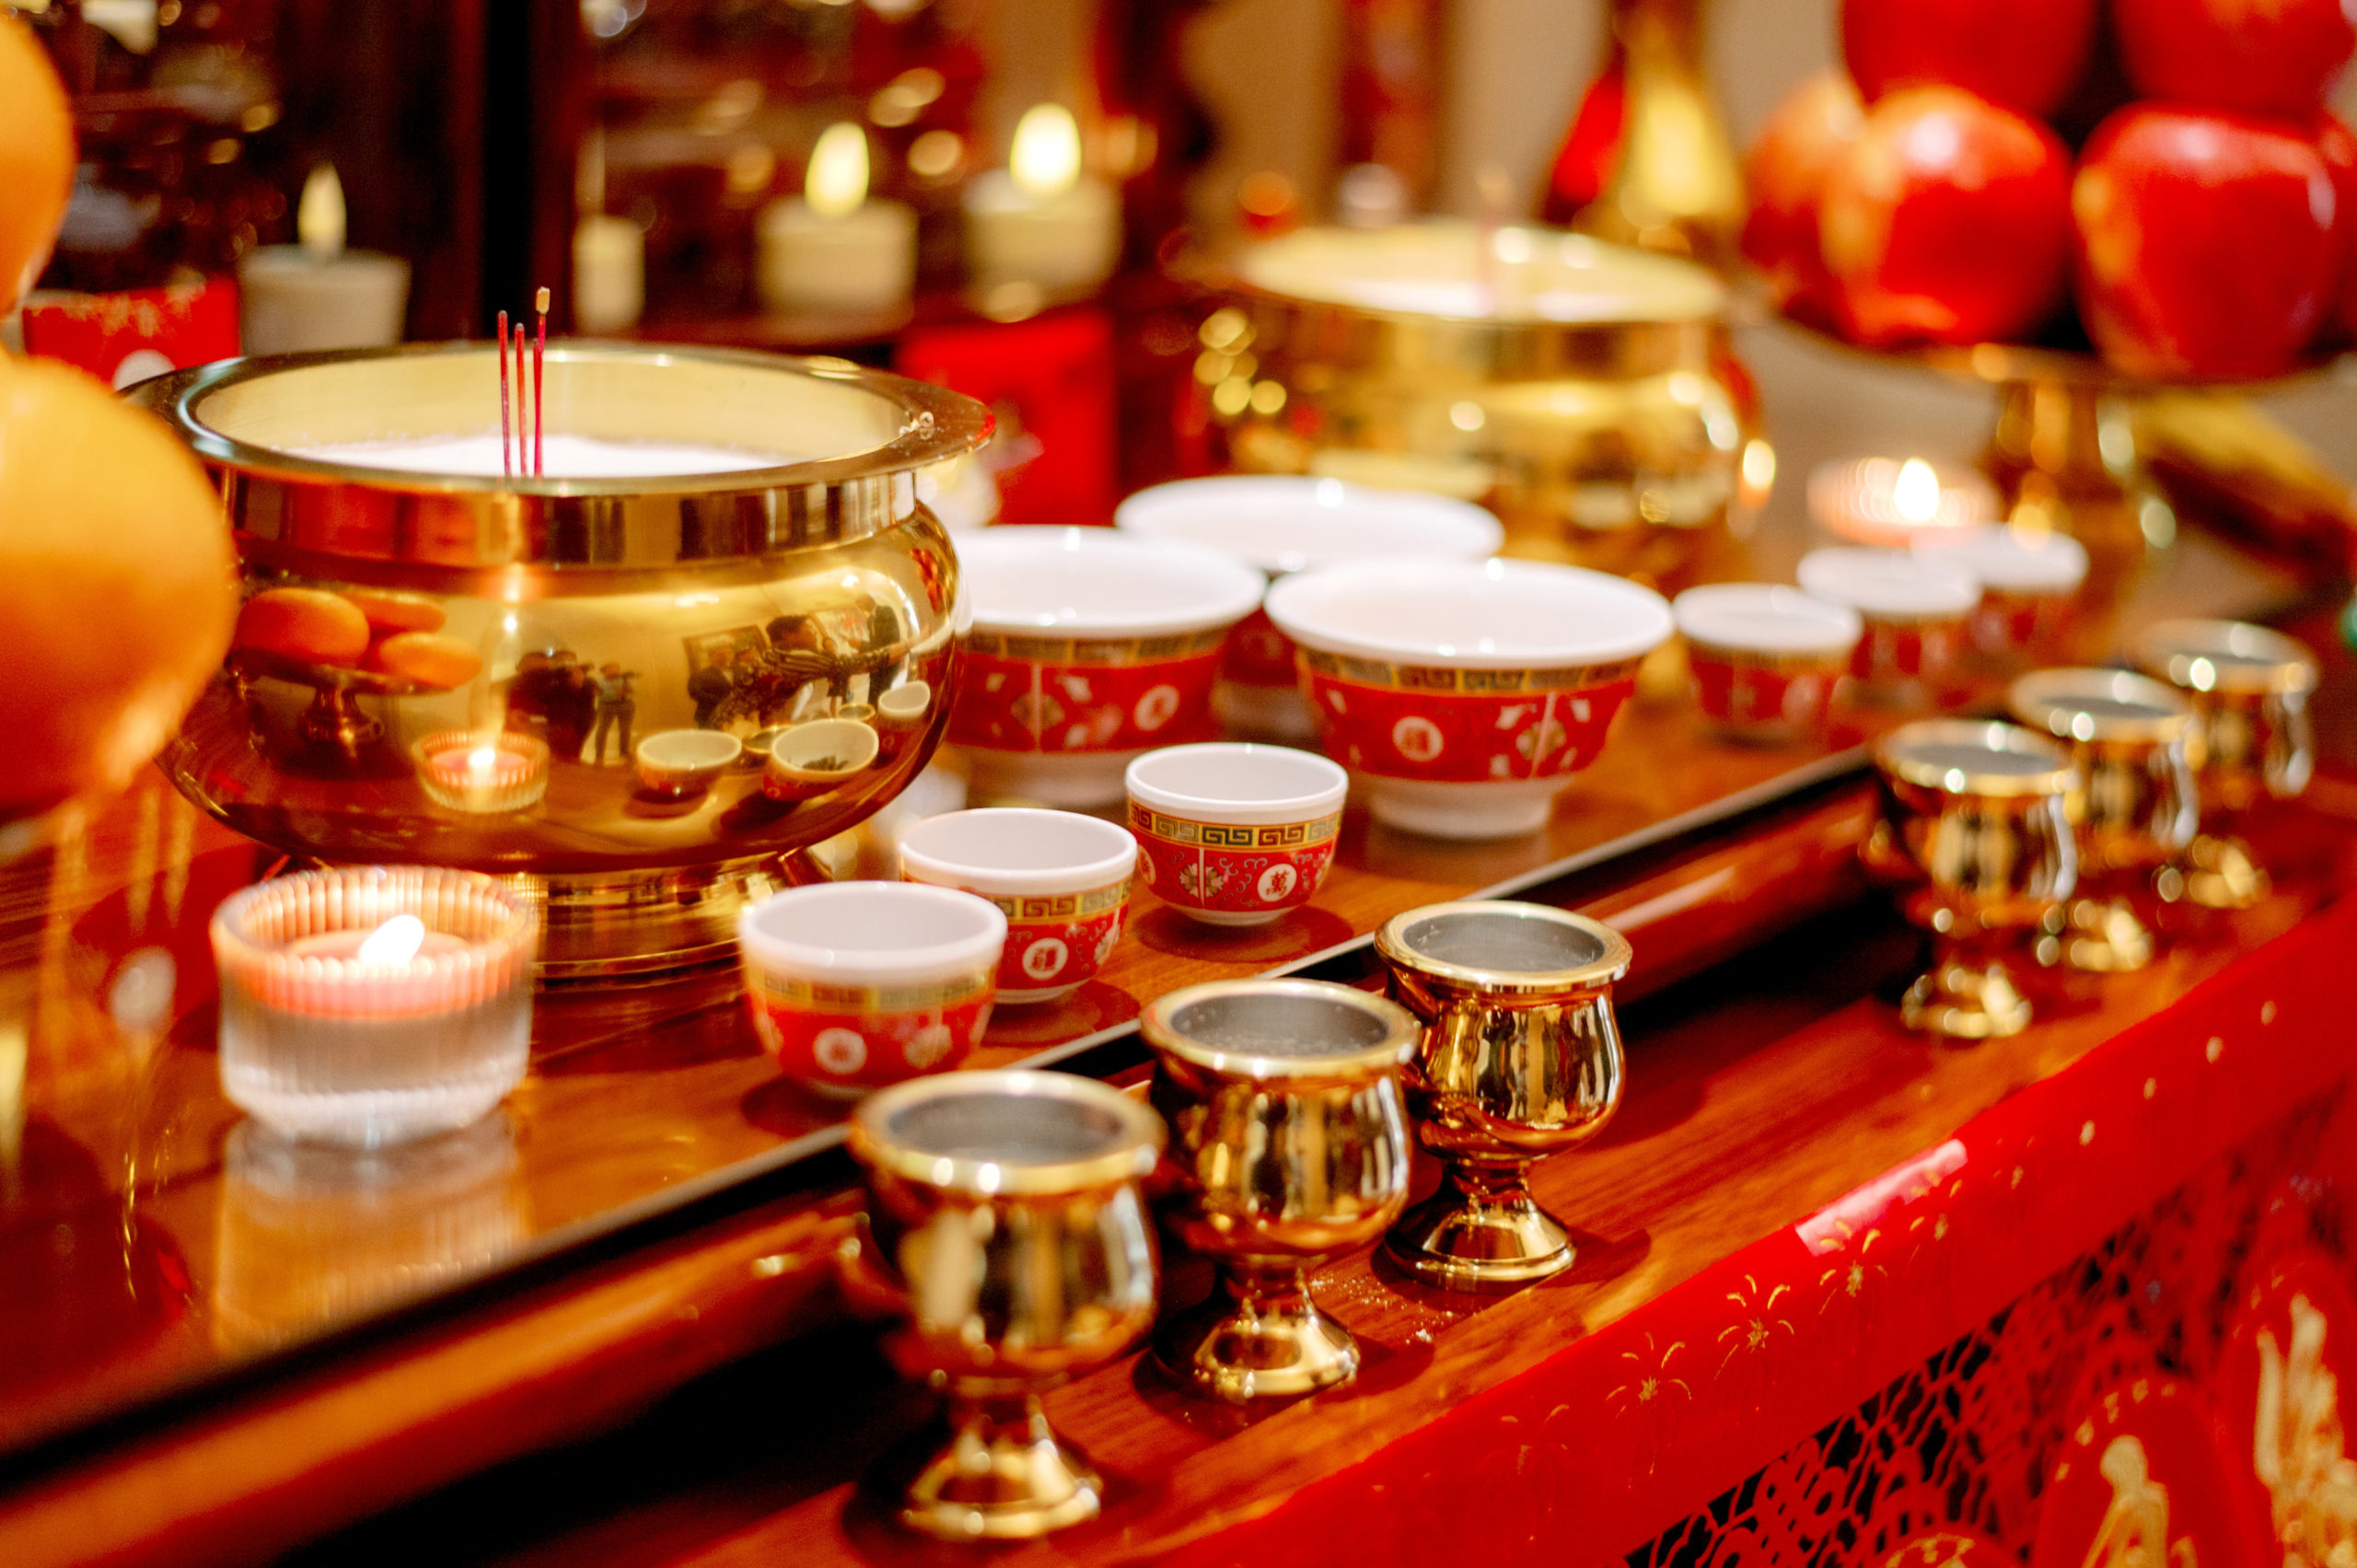 Chinese tableware for a wedding. Luxury wedding photography image by Jenny Fu Studio